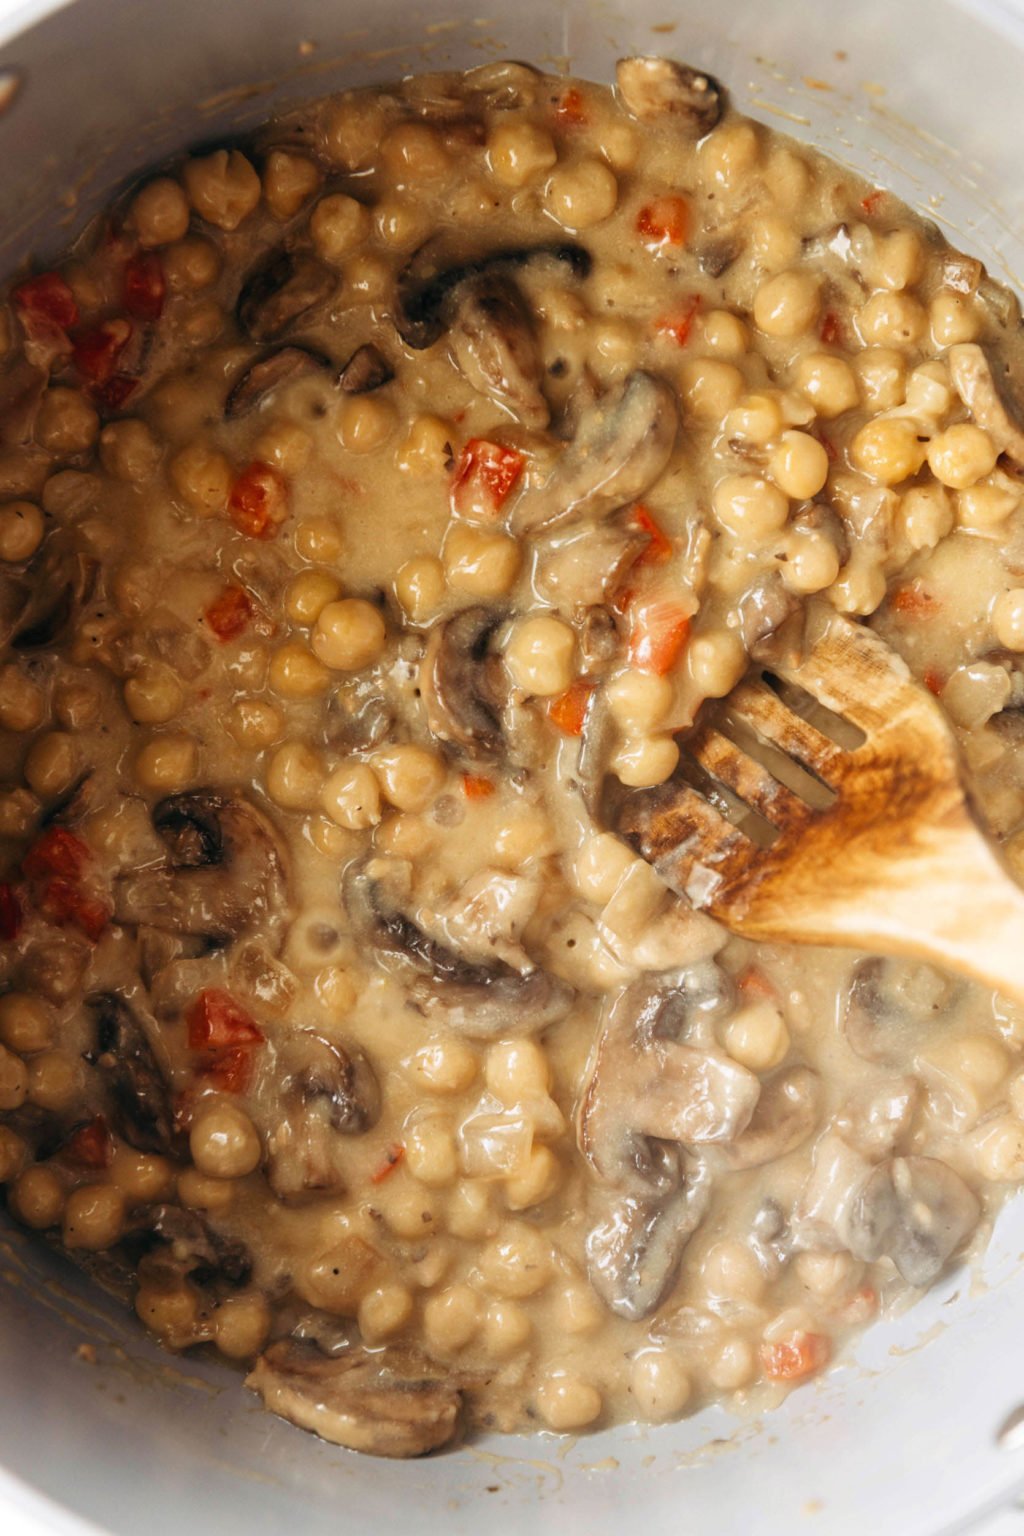 A dish of mushrooms and beans is simmering in a skillet. Dots of red pepper are distributed through the dish.